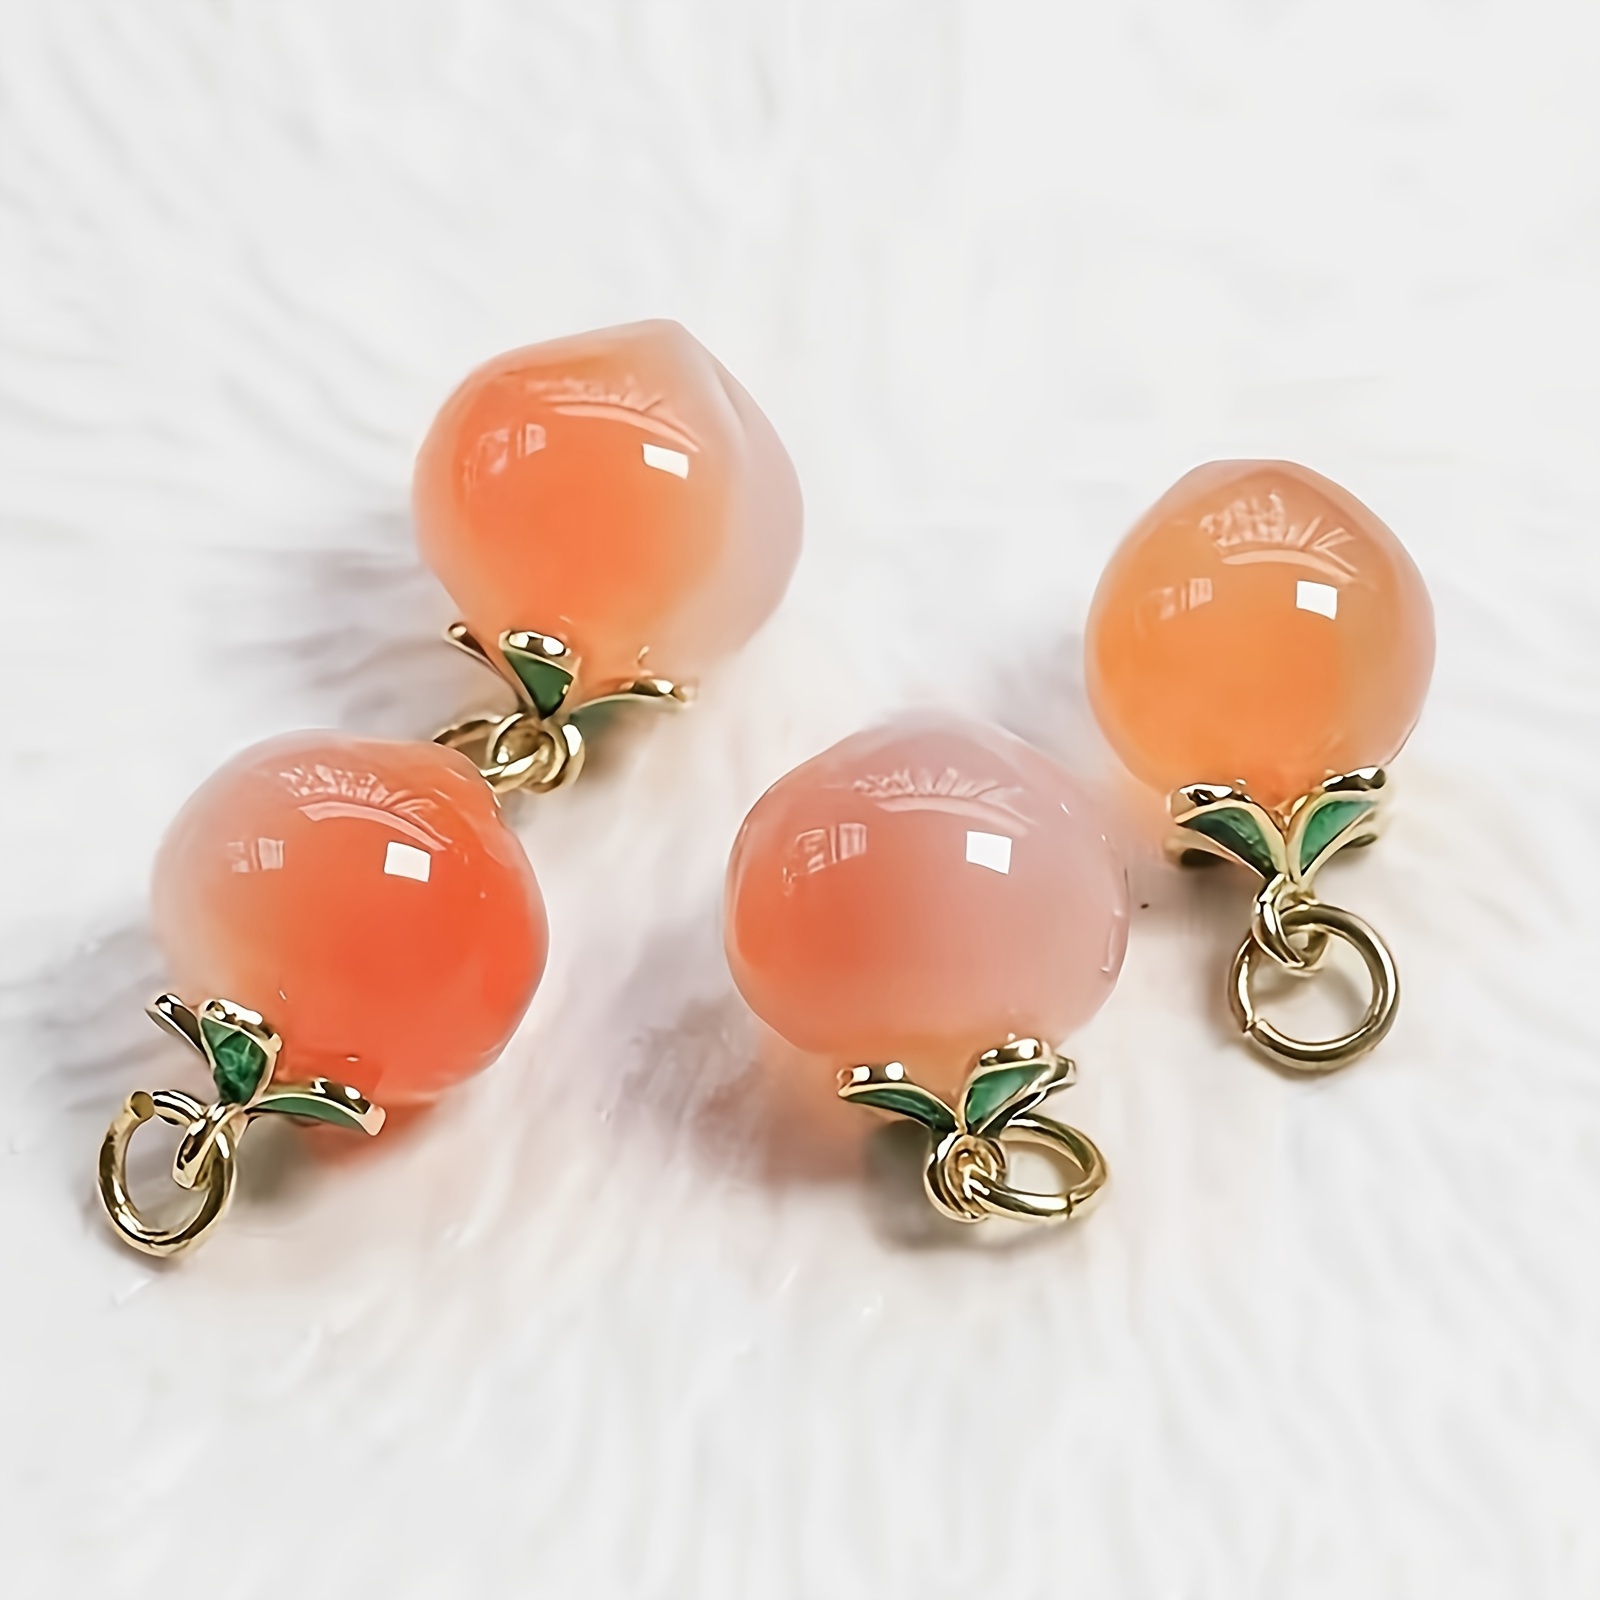 

4pc Natural Agate Peach Pendant Crystal Pink Diy Beads For Bracelet And Earrings Making, Stone Material, No Power Needed.